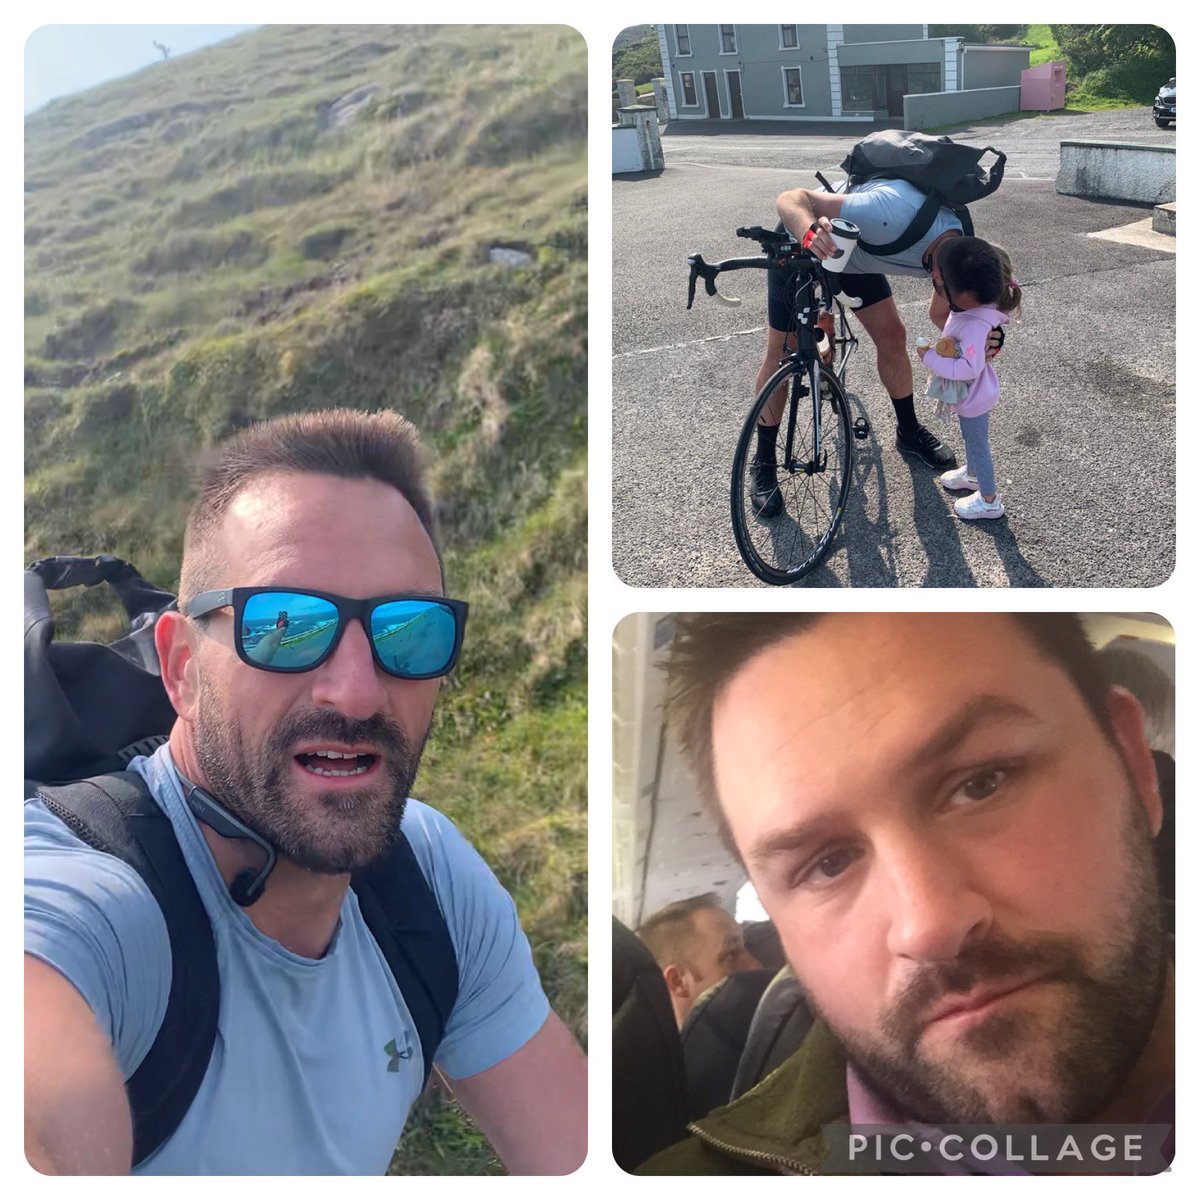 If you are struggling with Addiction & Poor Mental Health I want you to know “There Is A Way Back”

My Gambling Addiction spiralled so out of control by 2019 I thought my life was over 

72hrs into 🚴‍♀️ Wild Atlantic Way 🇮🇪
700km rode and the equivalent of Mt Everest climbed…